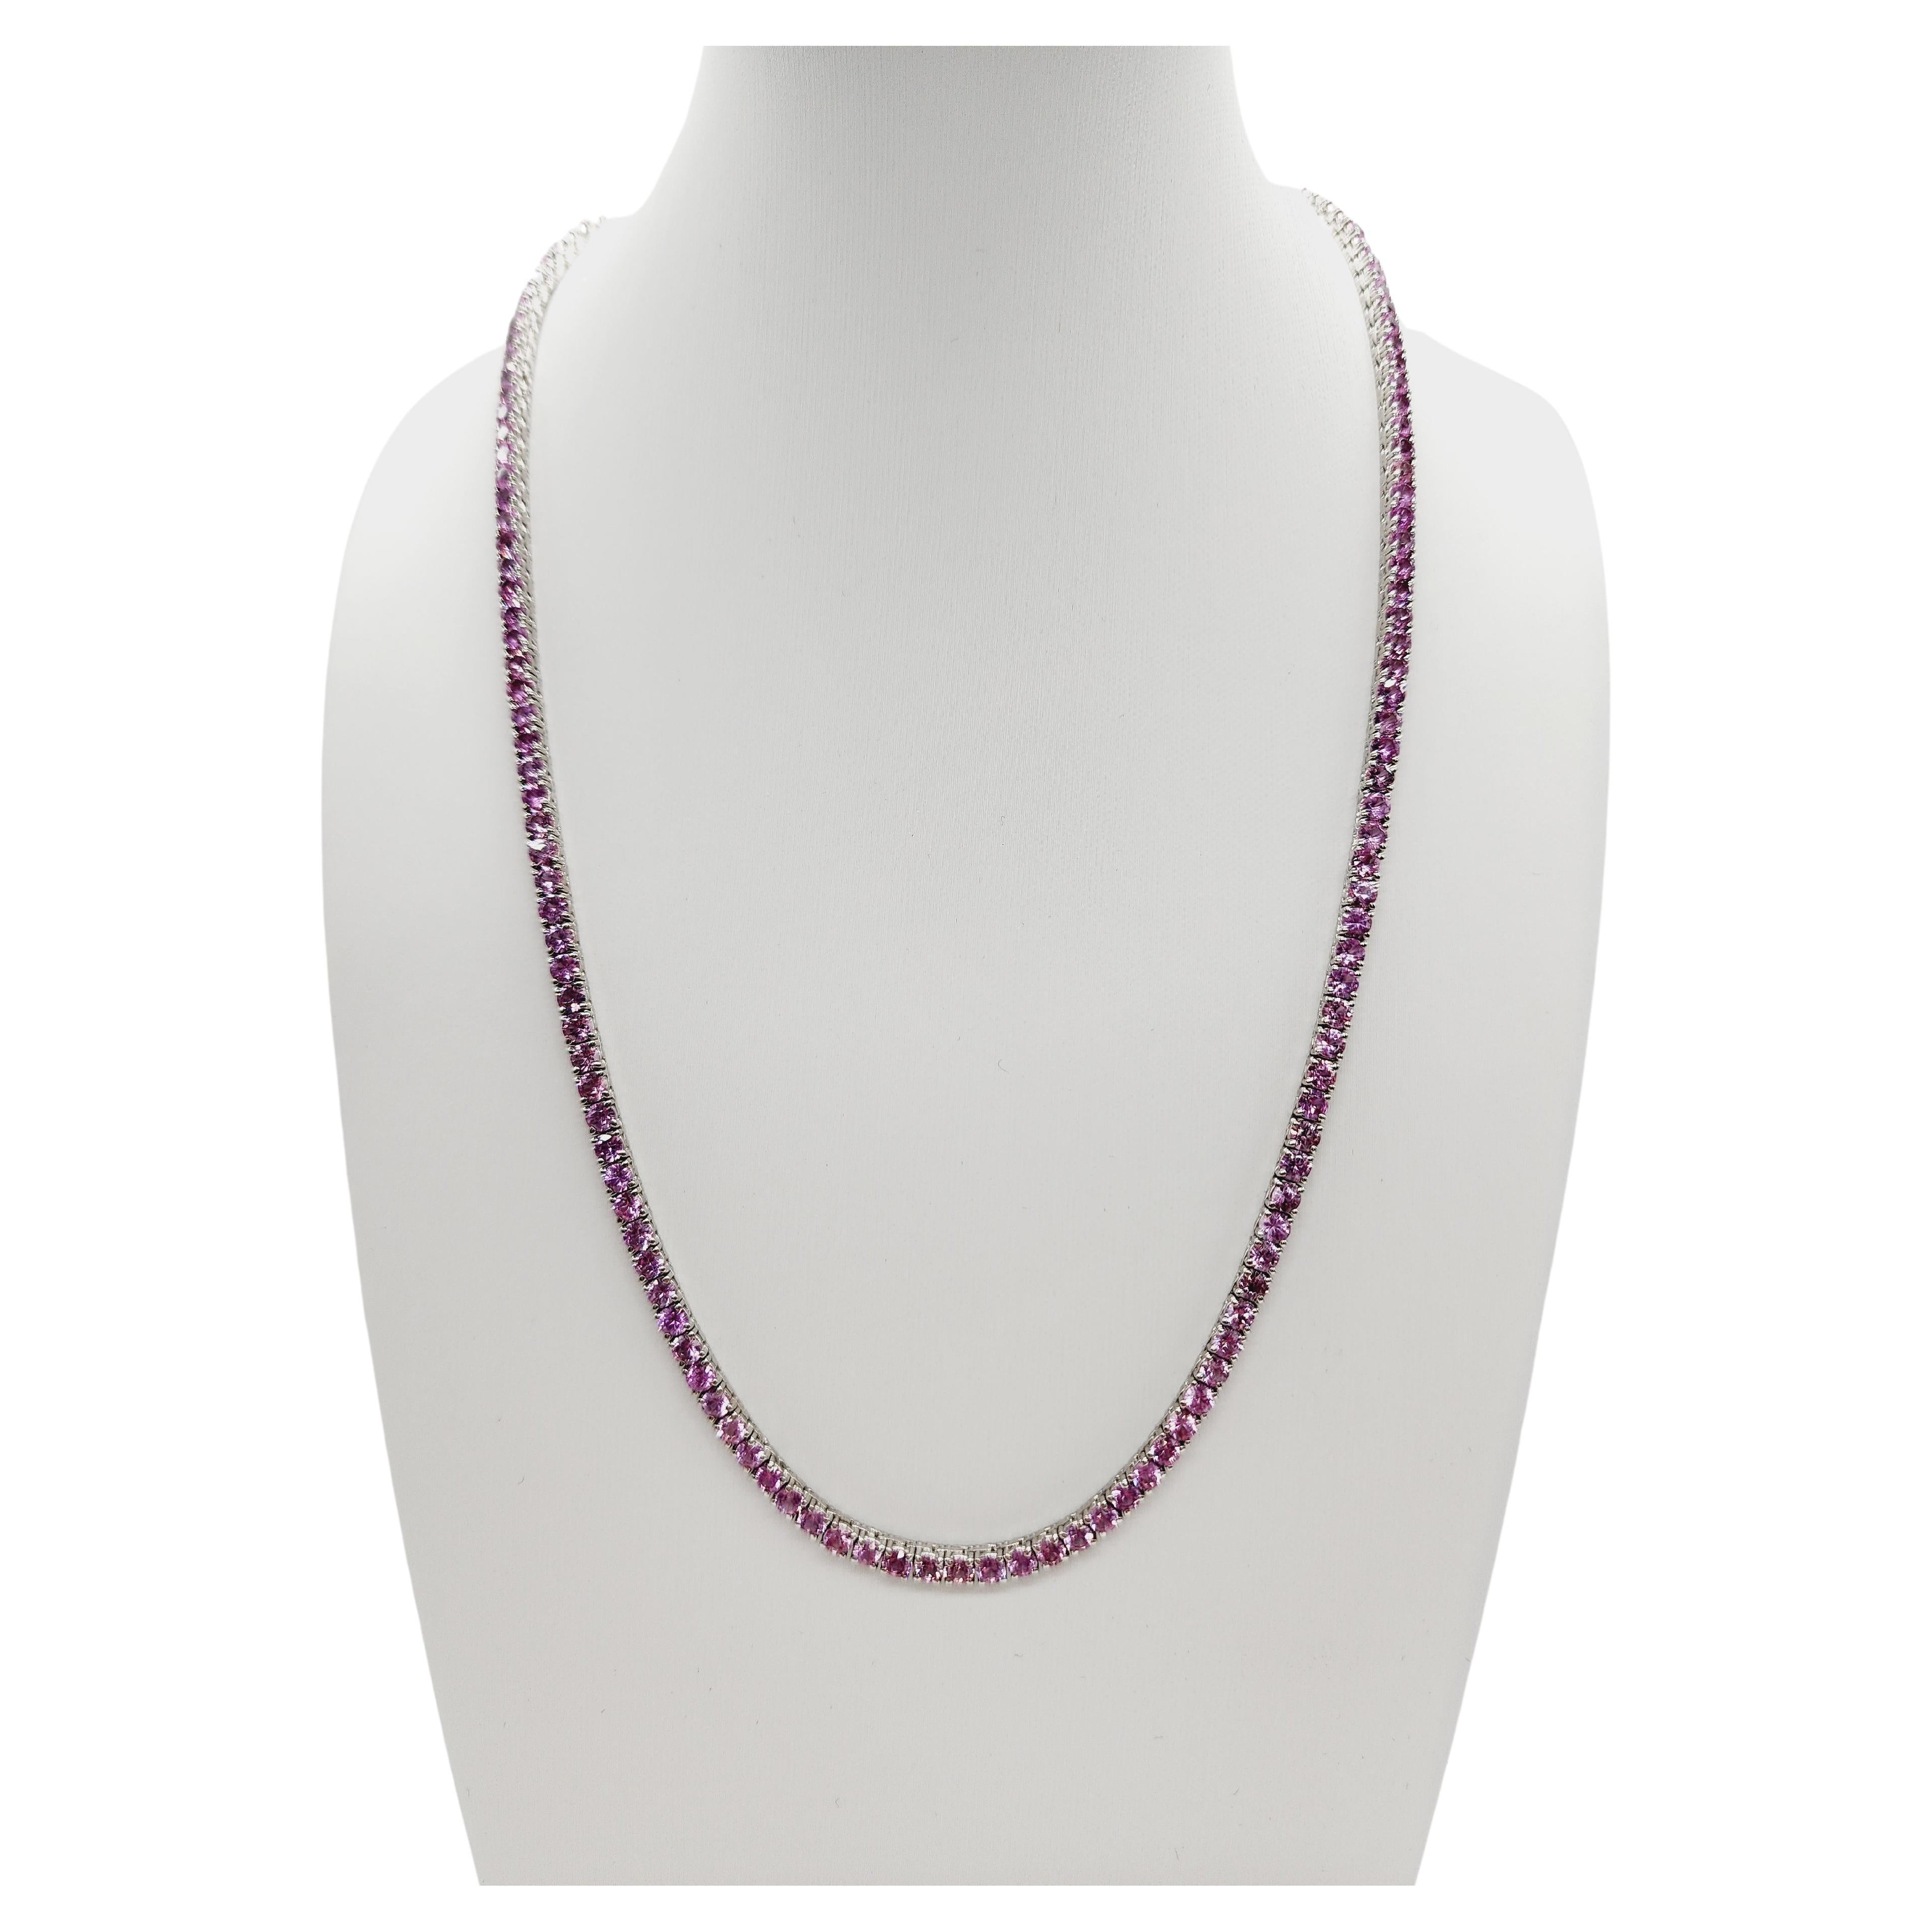 21 Carats Pink Sapphire Tennis Necklace 14 Karat White Gold 20'' For Sale